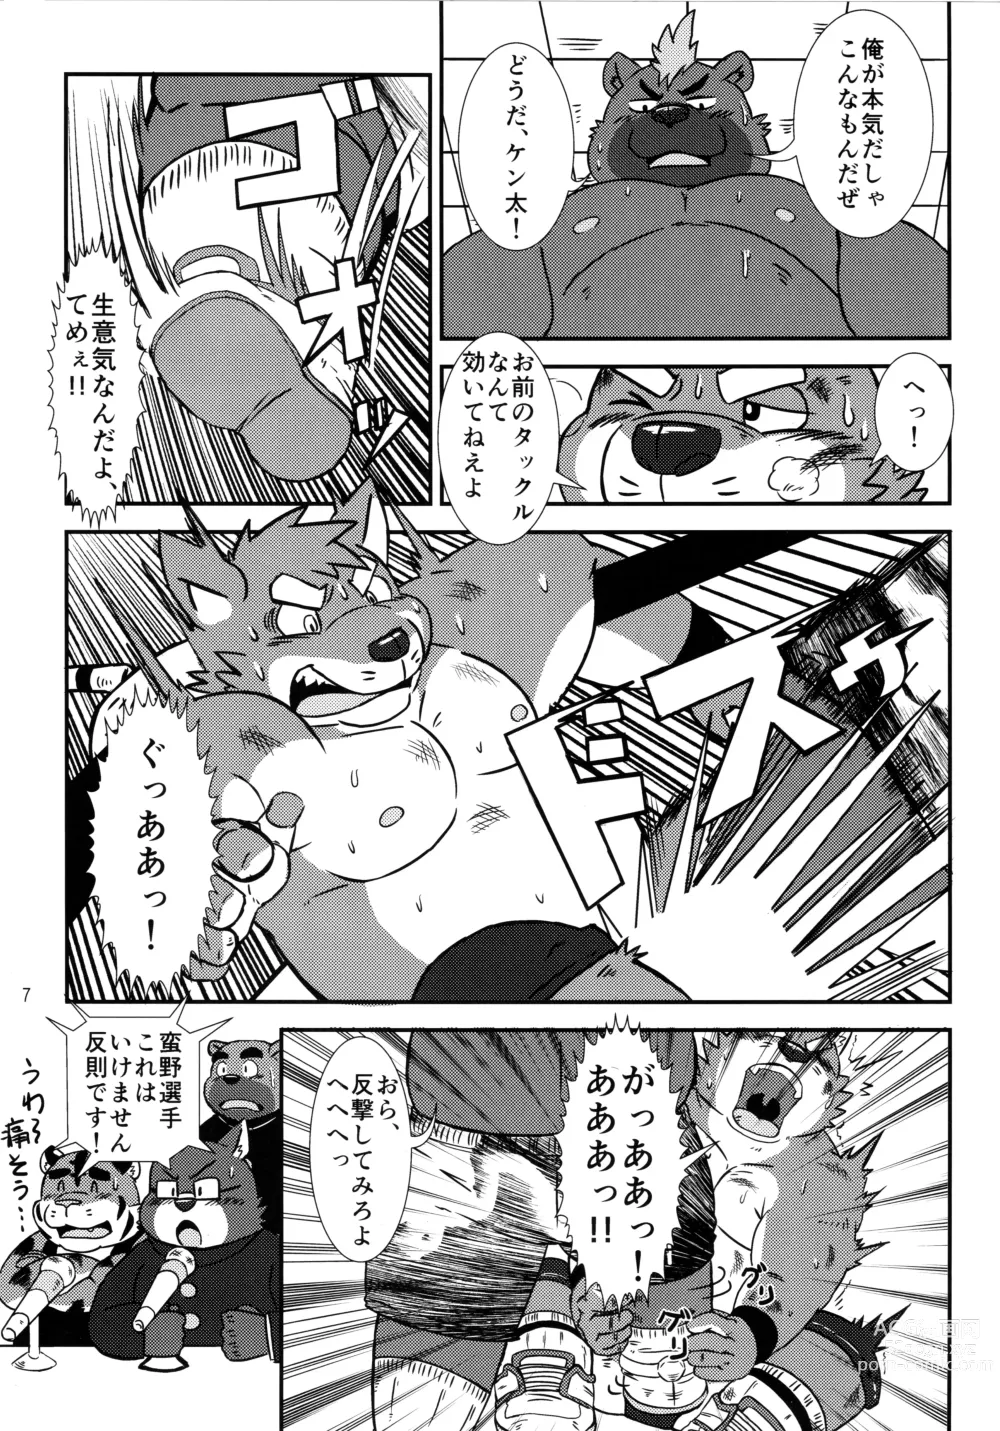 Page 8 of doujinshi BFW -BEAST FIGHTER WRESTLING-